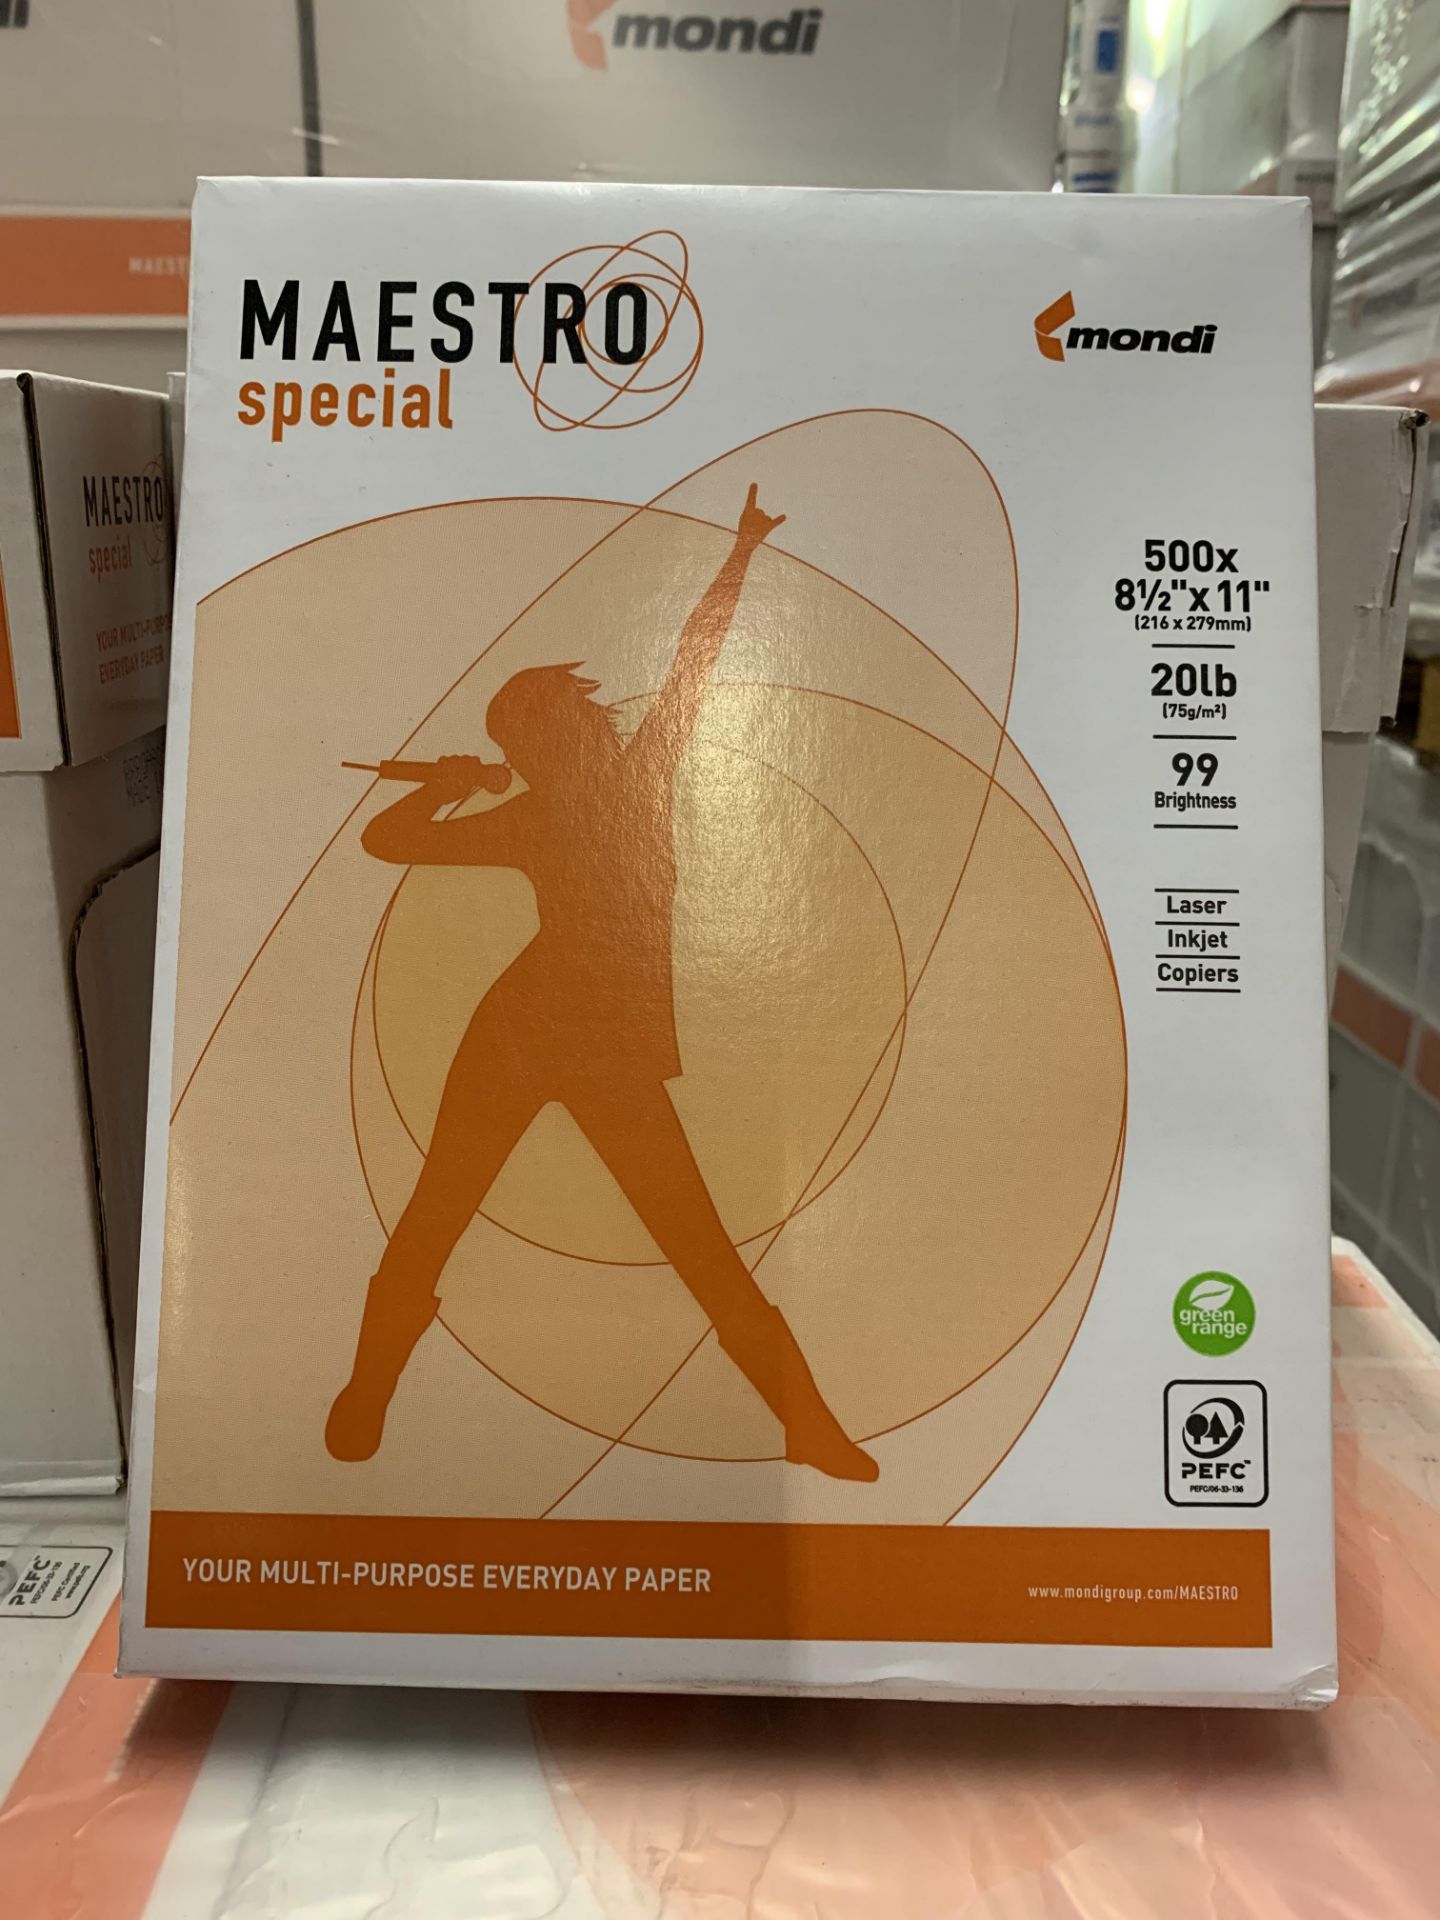 (10) NEW CASES OF MAESTRO SPECIAL 8-1/2 IN X 11 IN ,99 BRIGHTNESS 20 LB MULTI-PURPOSE EVERYDAY PAPER - Image 2 of 2